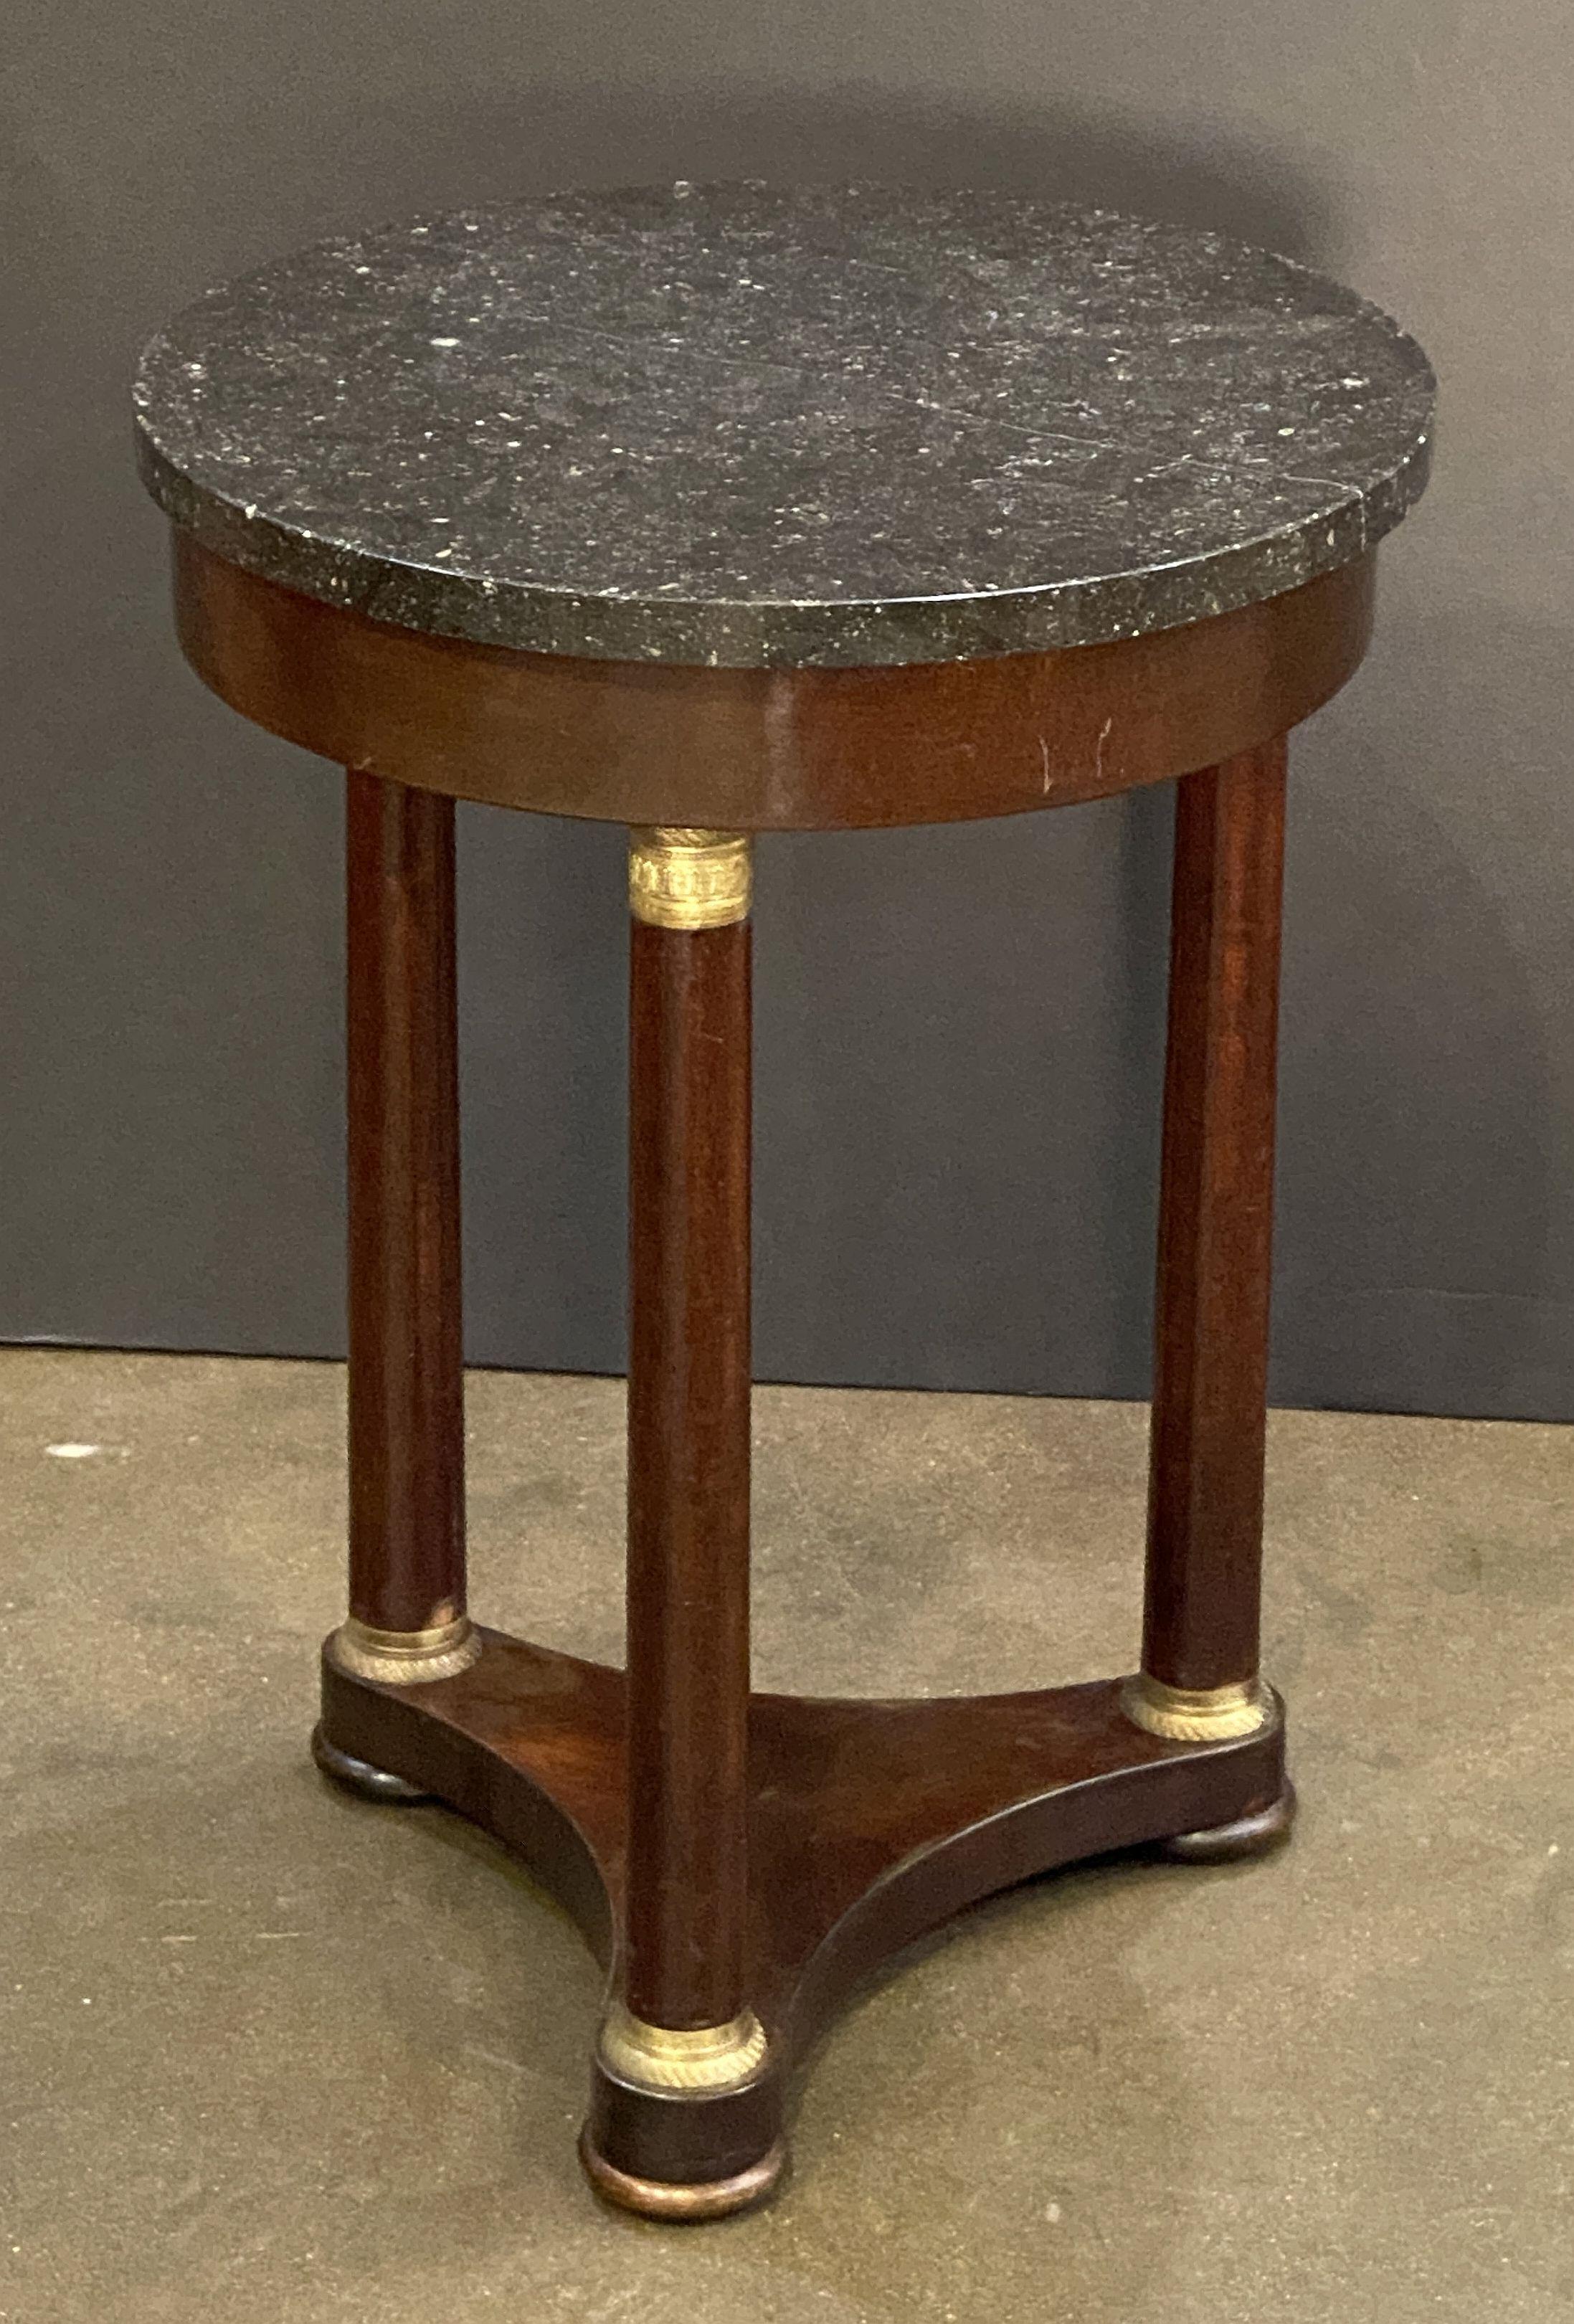 Metal French Marble-Top Gueridon Table or Guéridon in the Empire Style For Sale